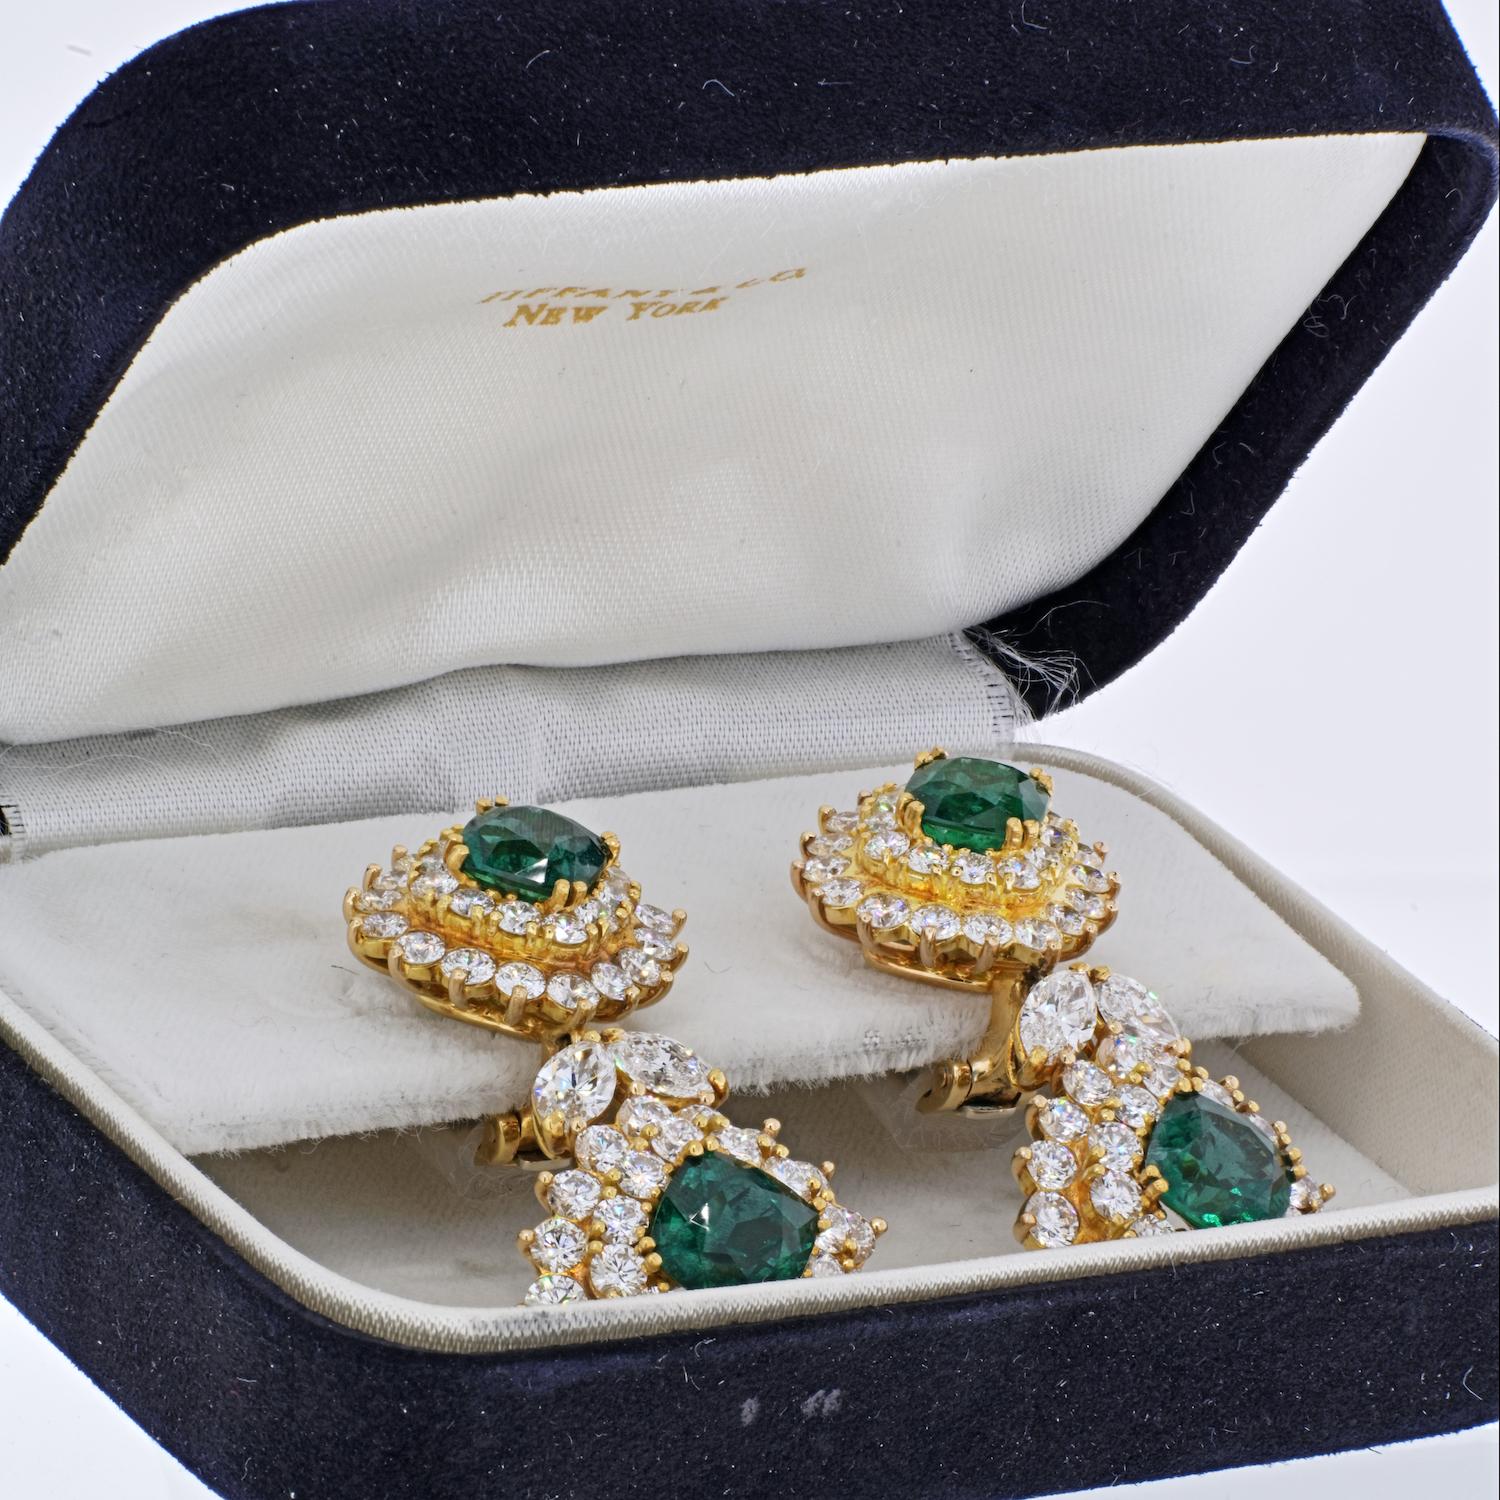 Centered by four perfectly matched green Zambian Emeralds totaling 9.08 Carats, accented by 112 Round-Brilliant Cut Diamonds totaling 12-13 Carats, and set in lush 18K Yellow Gold. These stunning earrings from Tiffany & Co are among their finest